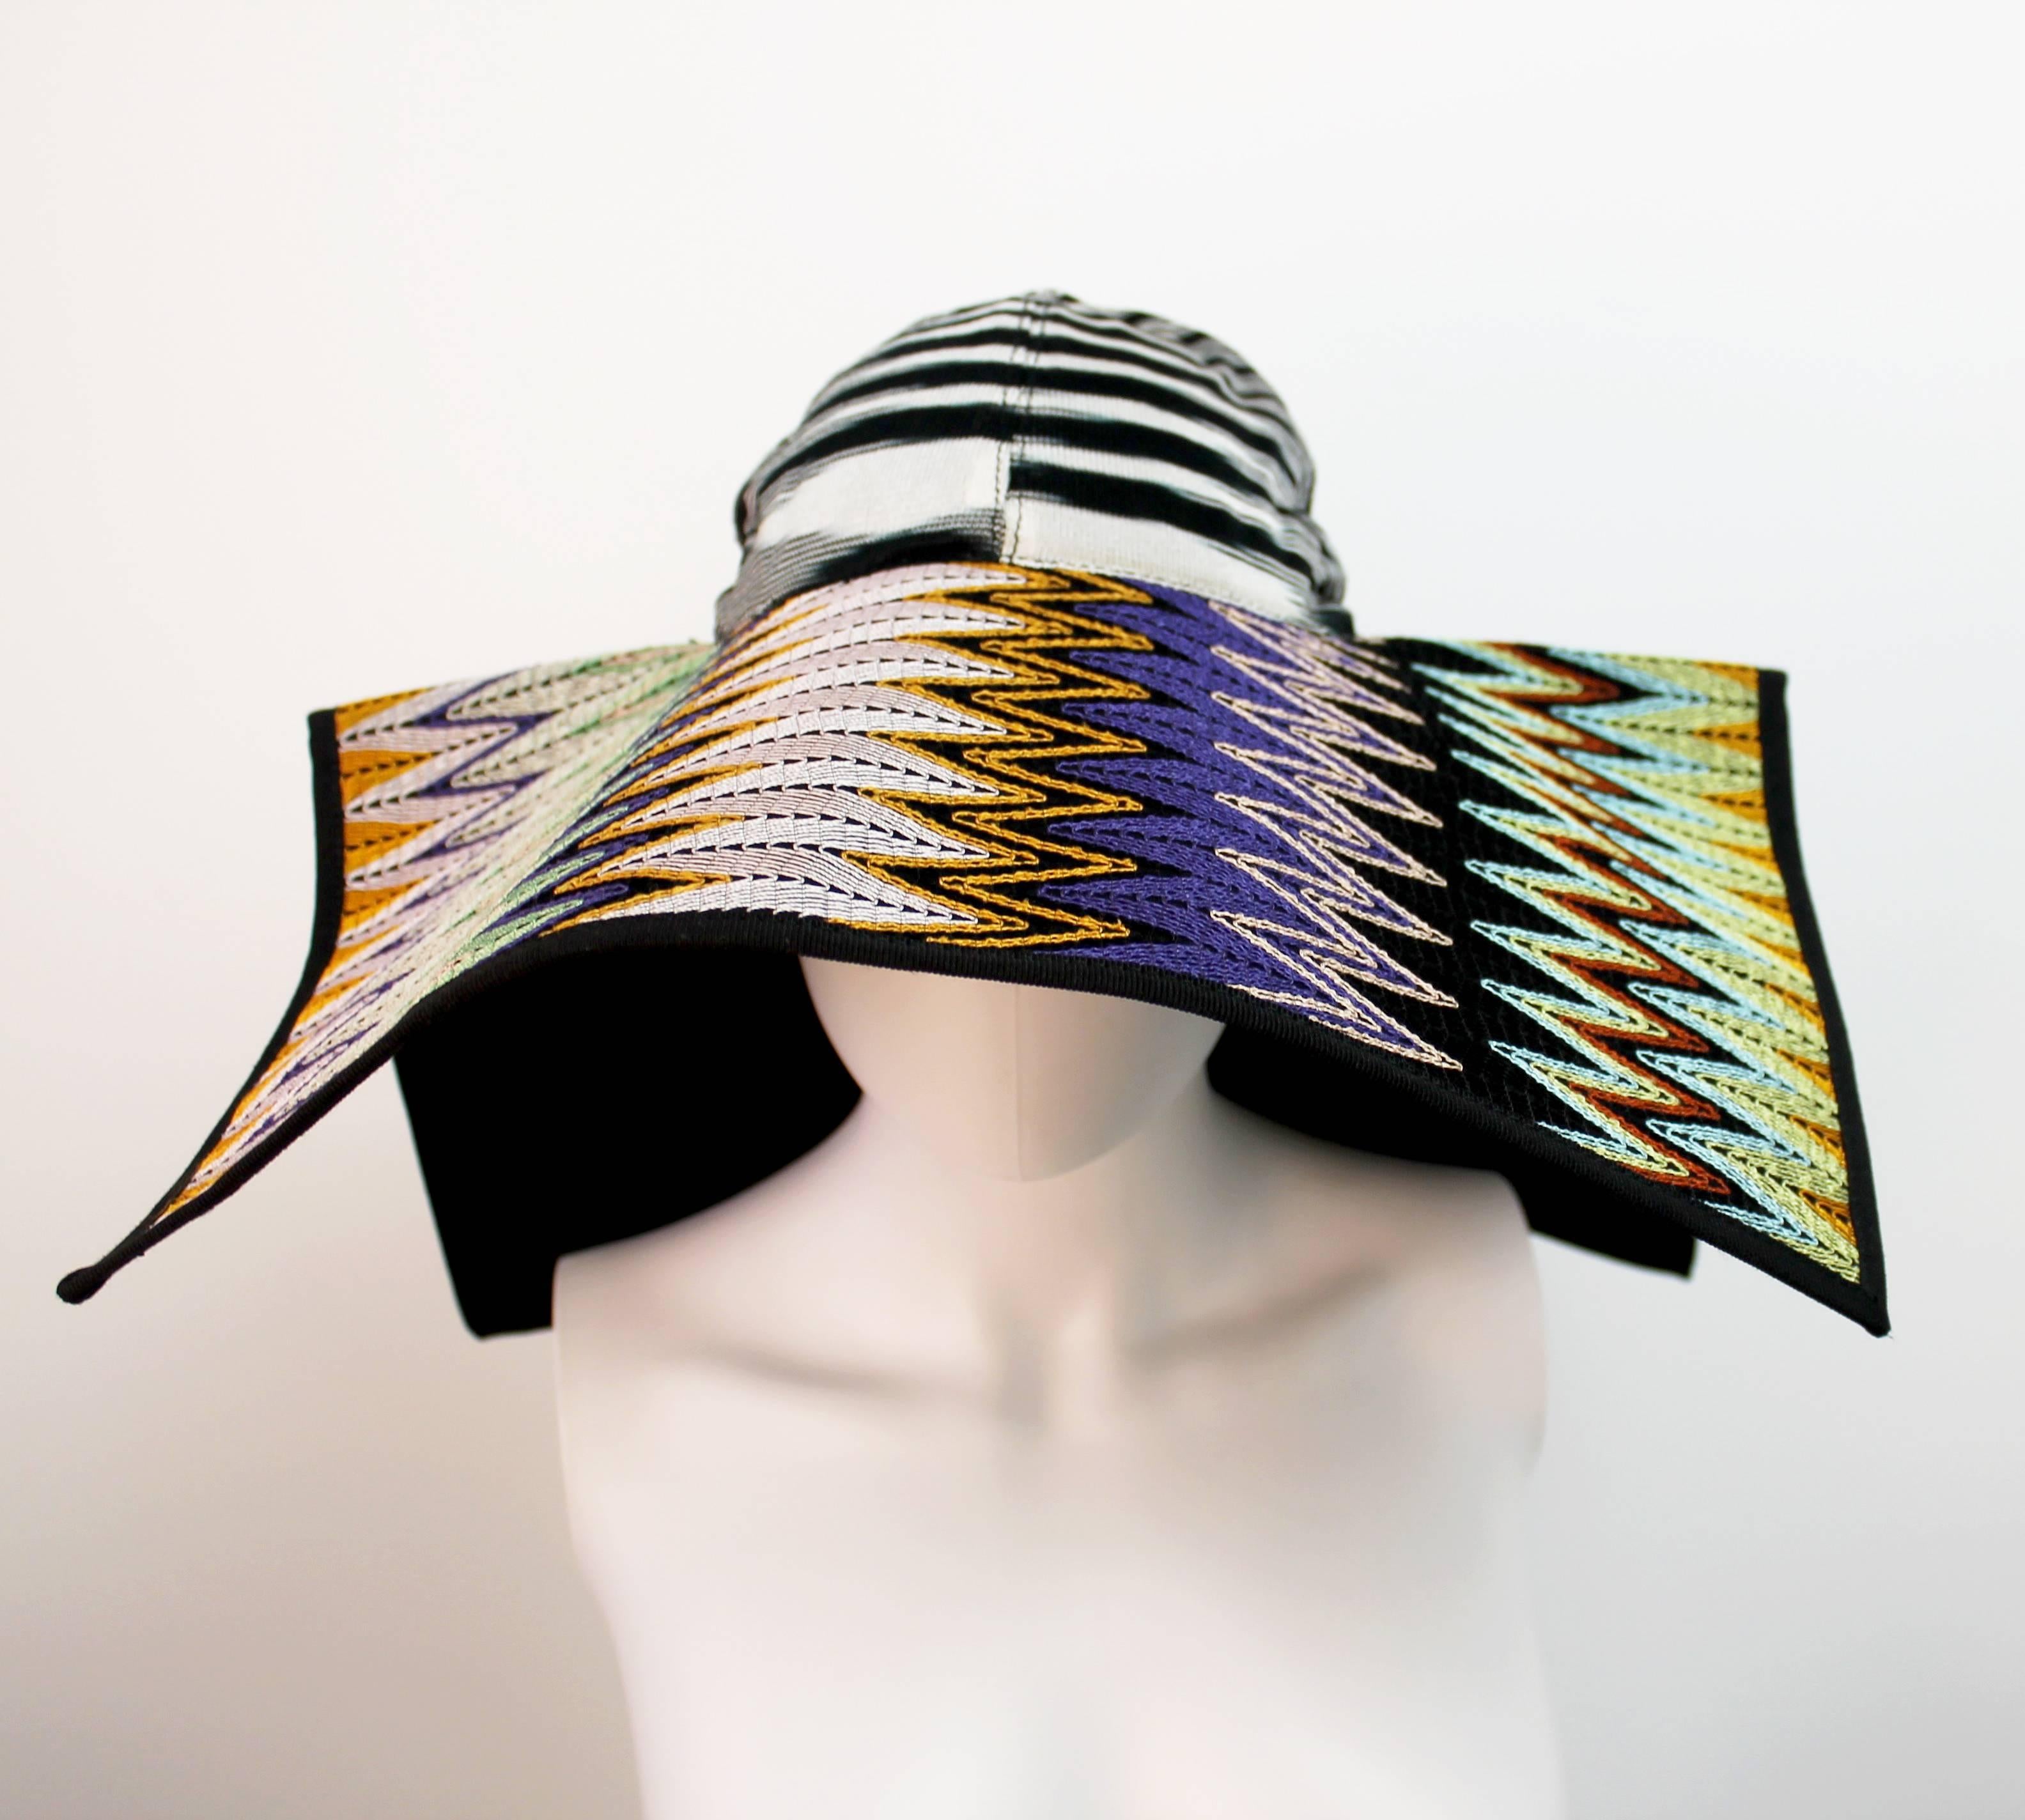 Classic Missoni sun hat from Spring/Summer 2011 featuring the brands iconic zig-zag colorful knit pattern. Is shaped like a square when lying flat.